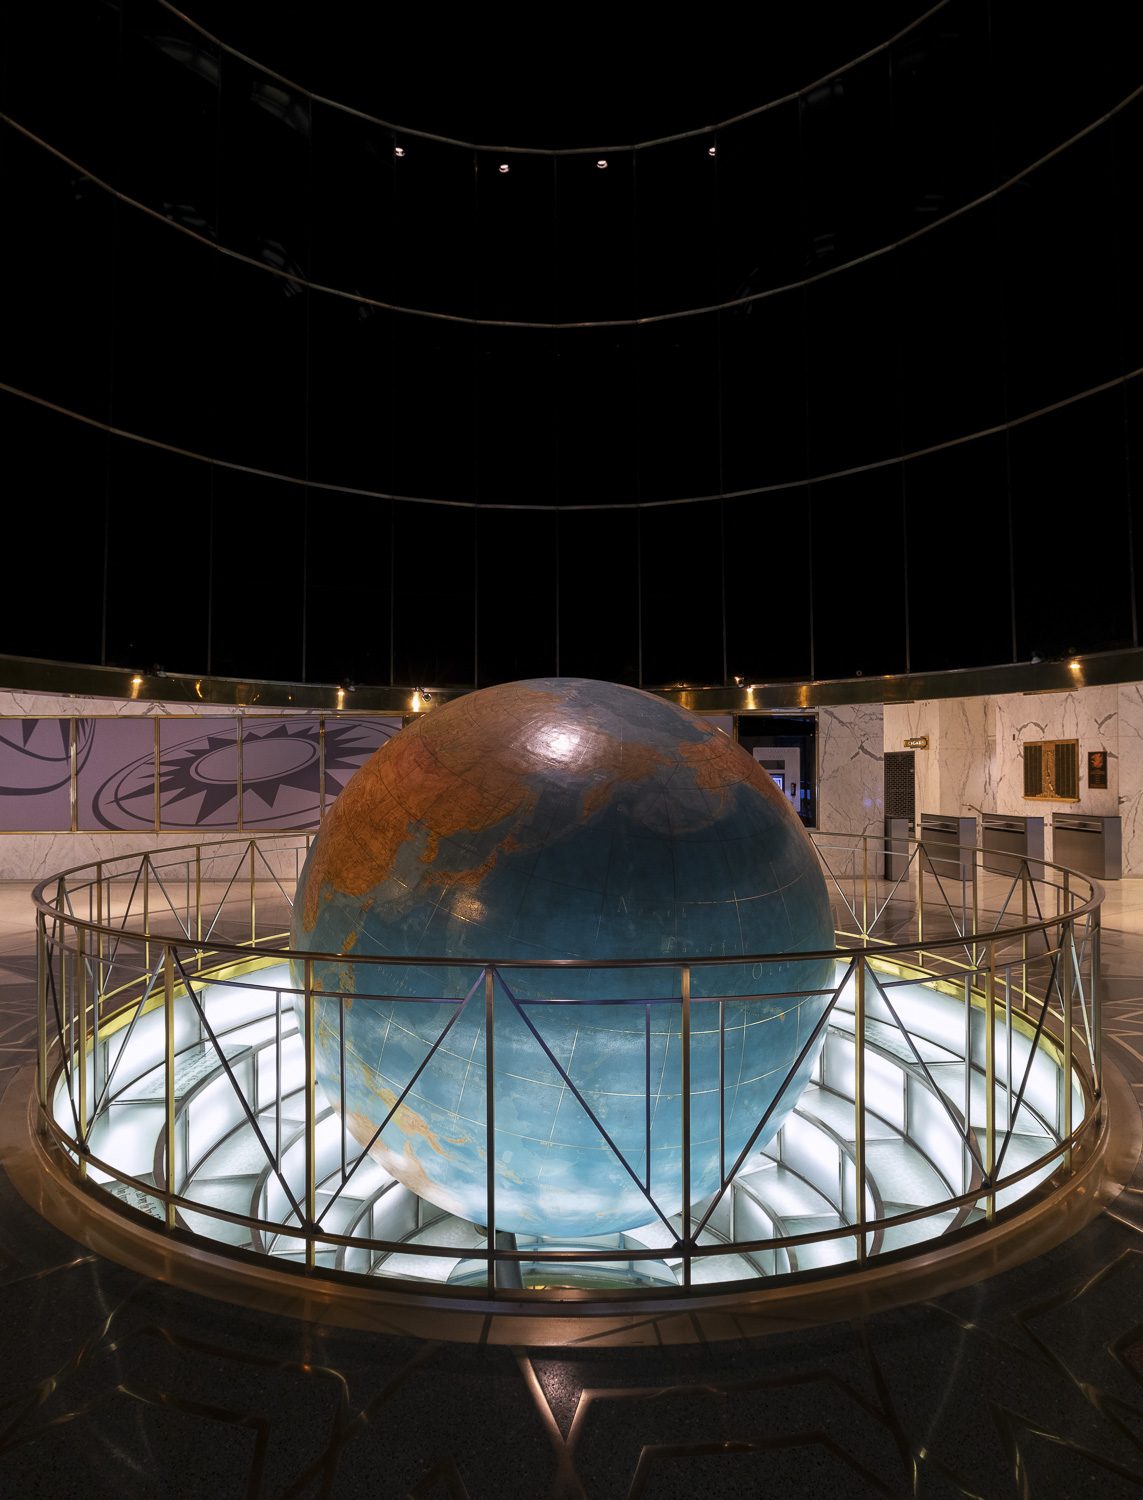 A color photograph of a portion of the lobby with a blue and green-brown globe of the earth in the center. The globe is sunken into a circular pit with stepped sides made of a translucent material that glows and illuminates the globe from below. The pit is surrounded by a simple brass railing of vertical, horizontal, and diagonal bars.